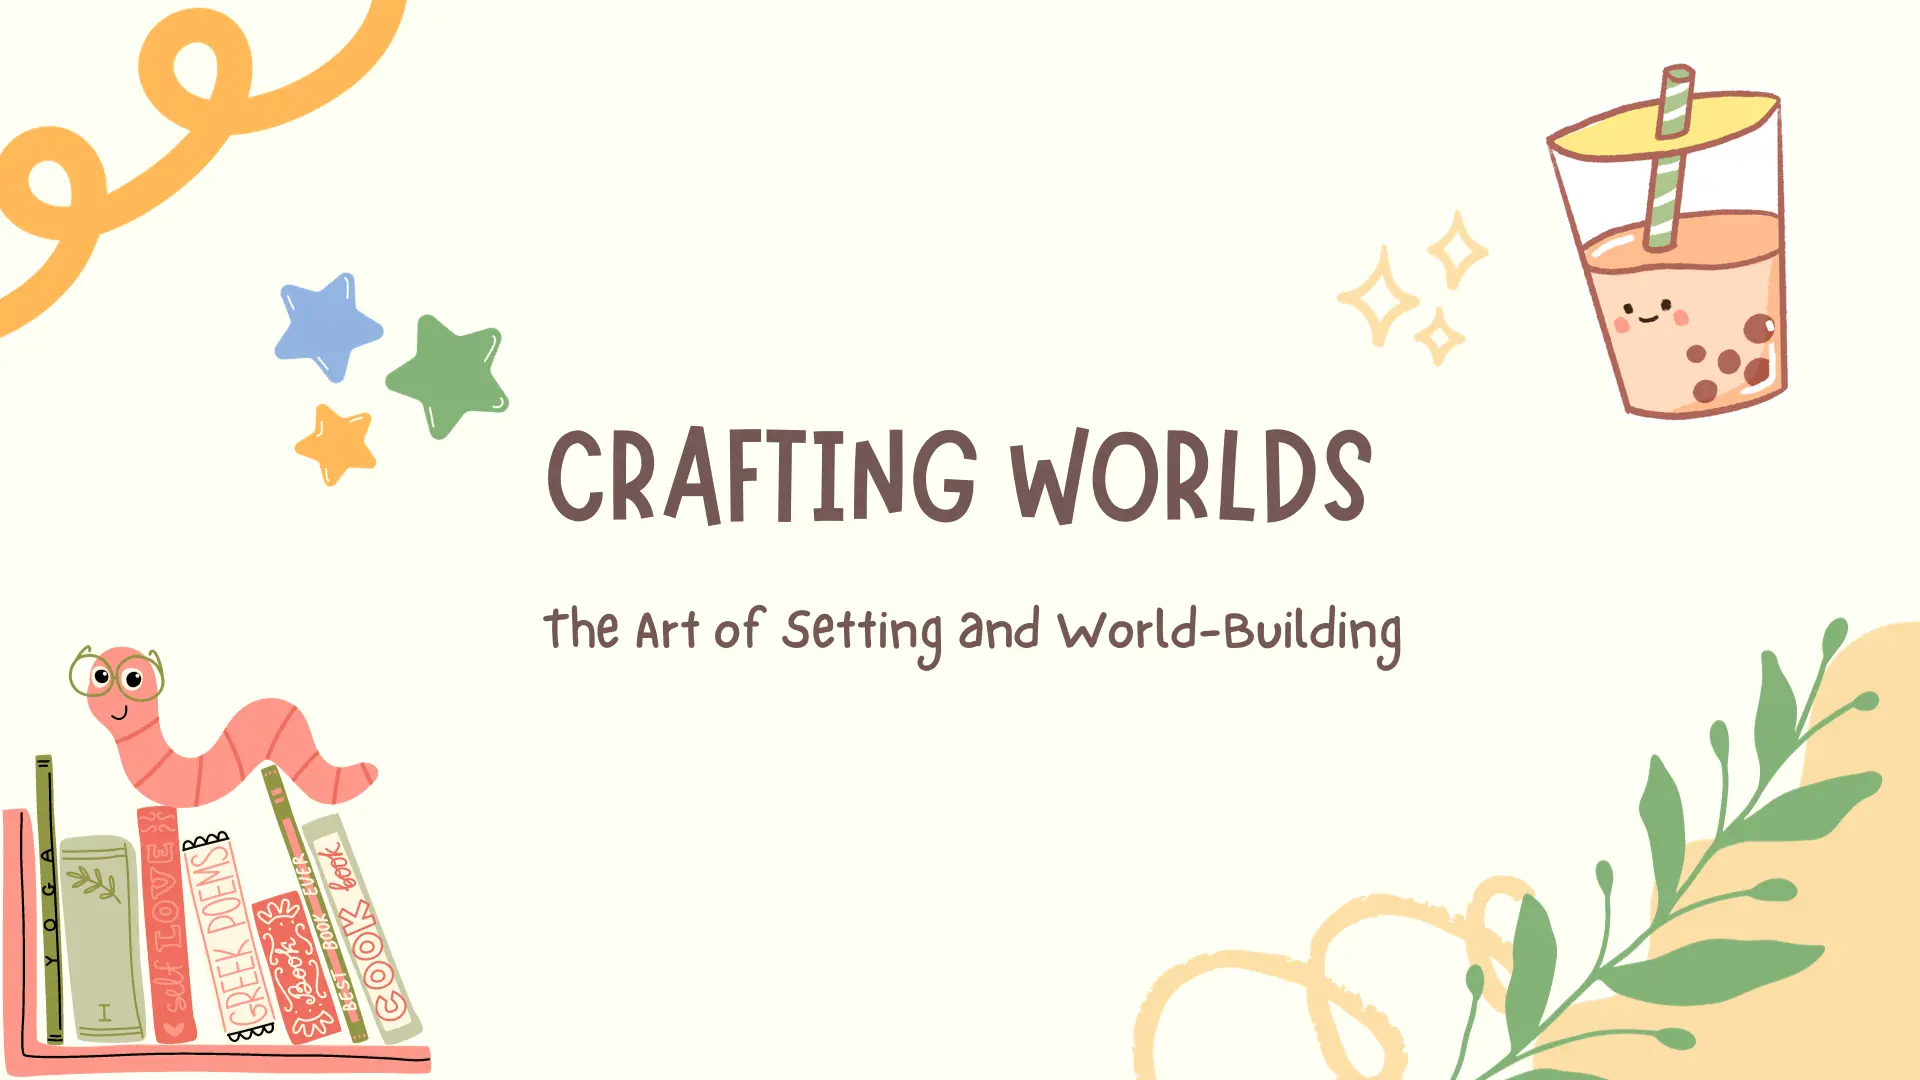 Crafting Worlds: The Art of Setting and World-Building